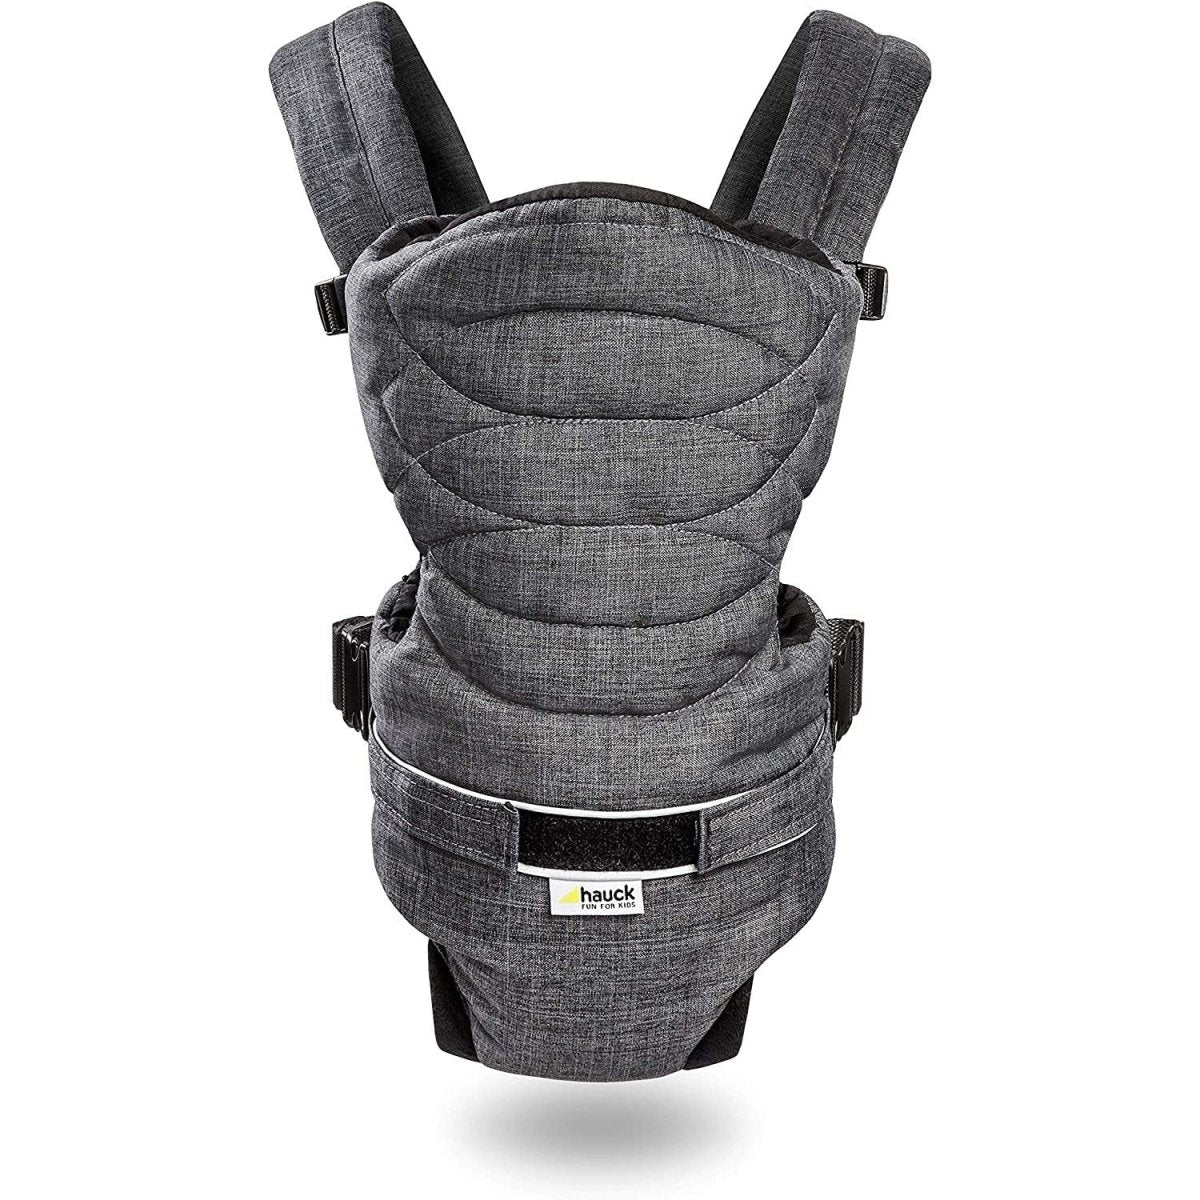 Hauck 2 Way Carrier- Baby Carrier With 4 Carry Positions-Melange Charcoal - 580981